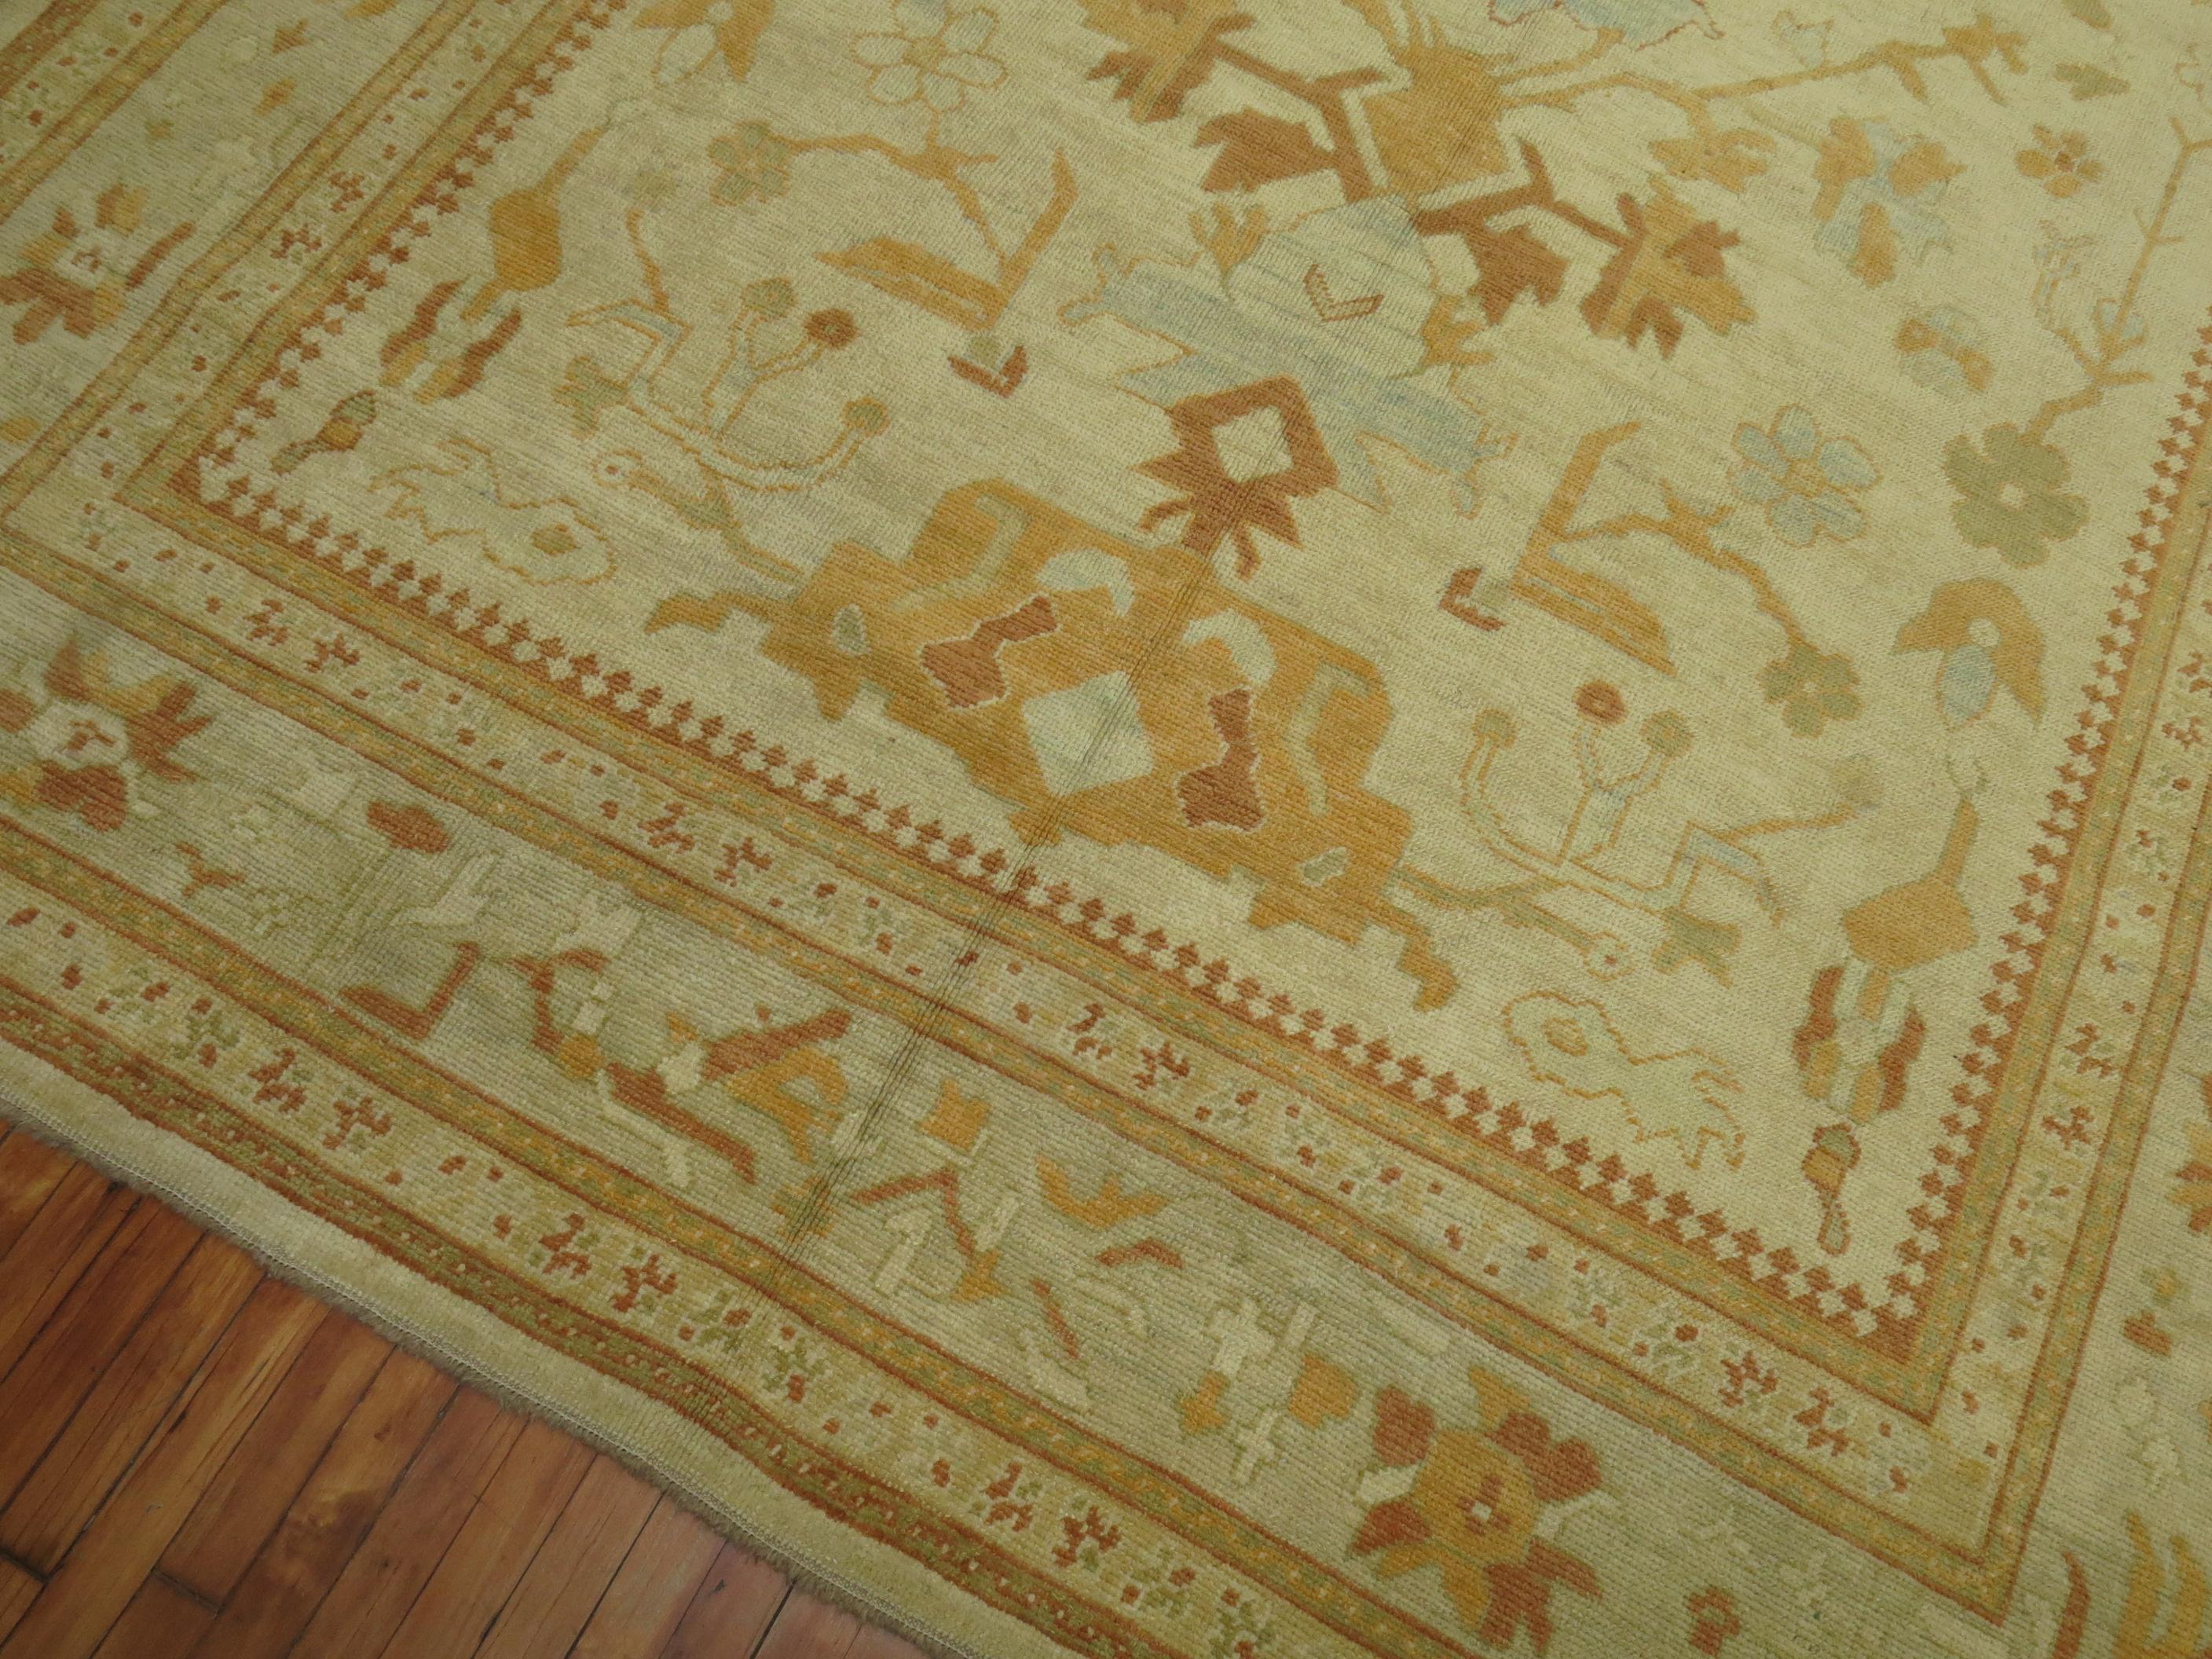 Decorative Turkish Square Oushak In Excellent Condition For Sale In New York, NY